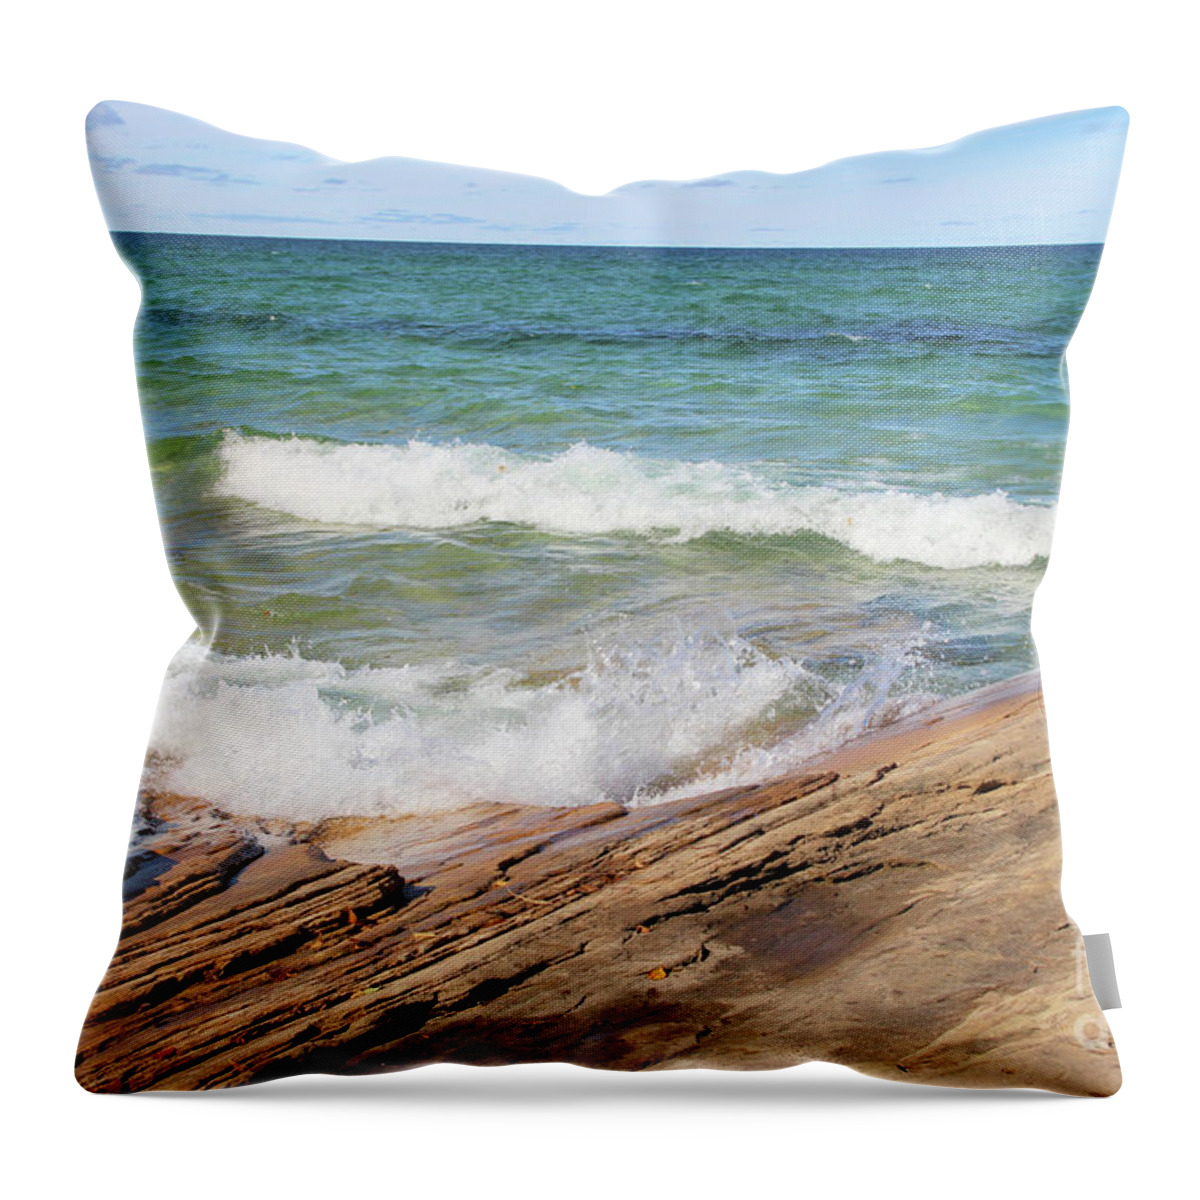 Water Throw Pillow featuring the photograph Waves on Rocky Shore by Brenda Ackerman